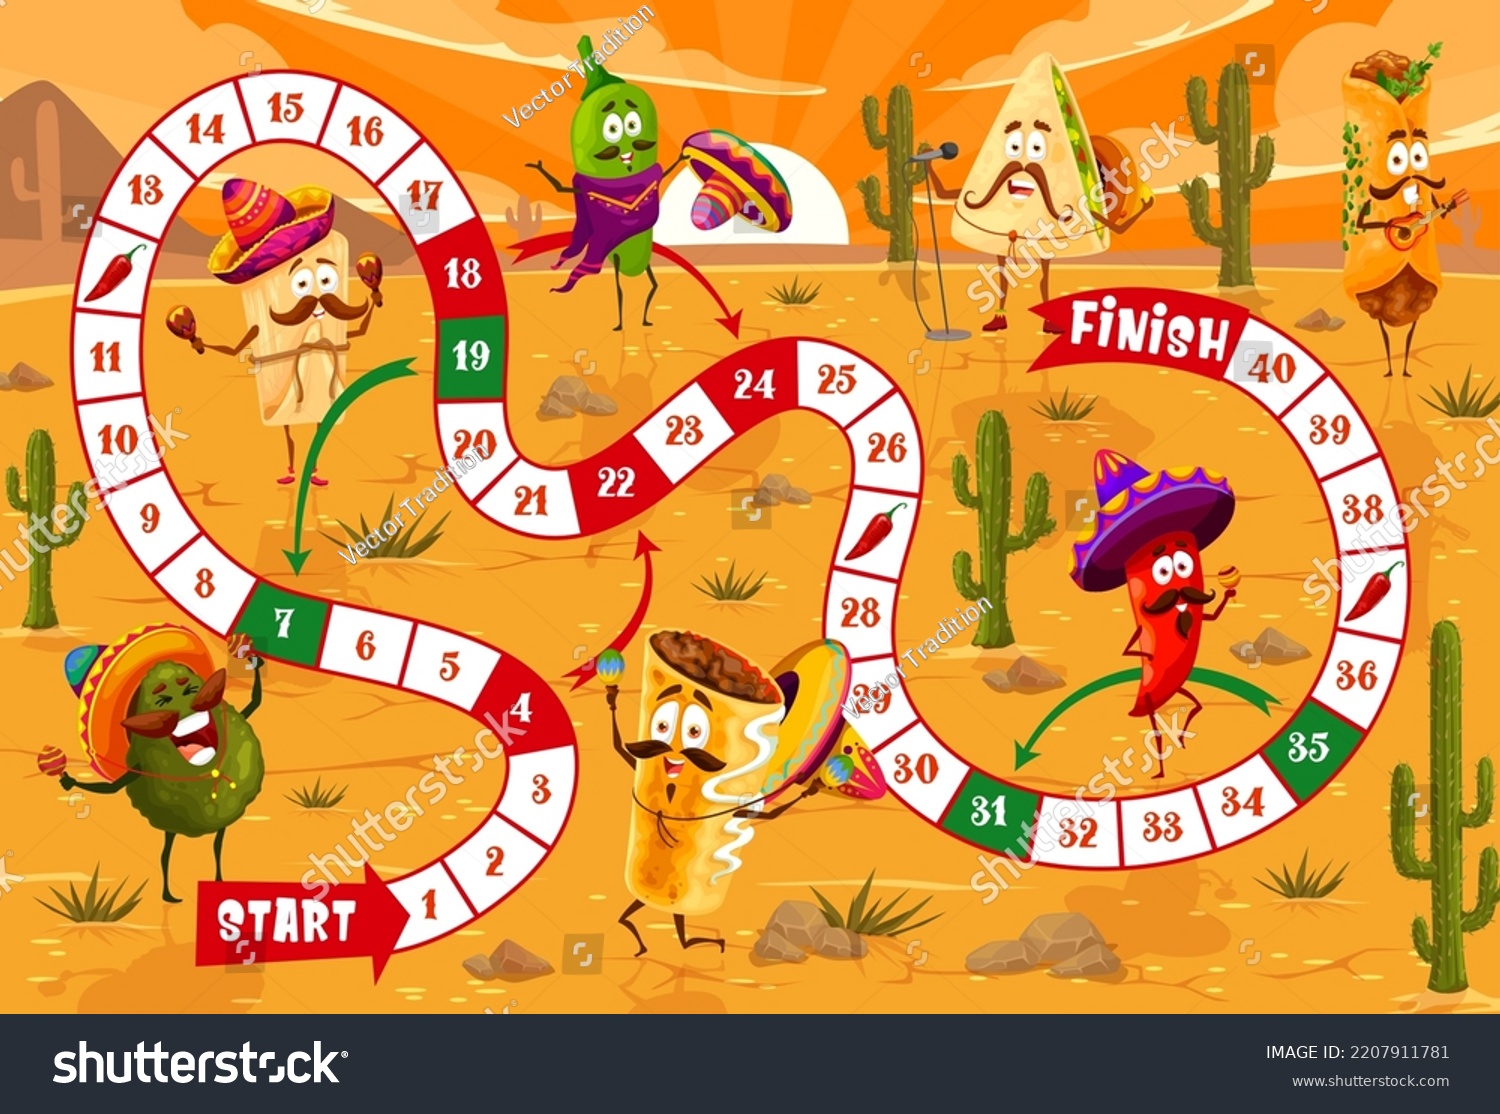 SVG of Cartoon mexican food character in desert kids board game. Vector walk boardgame with numbered snake path and tex mex snacks chili pepper, tacos and jalapeno, burrito and avocado, quesadilla, enchilada svg